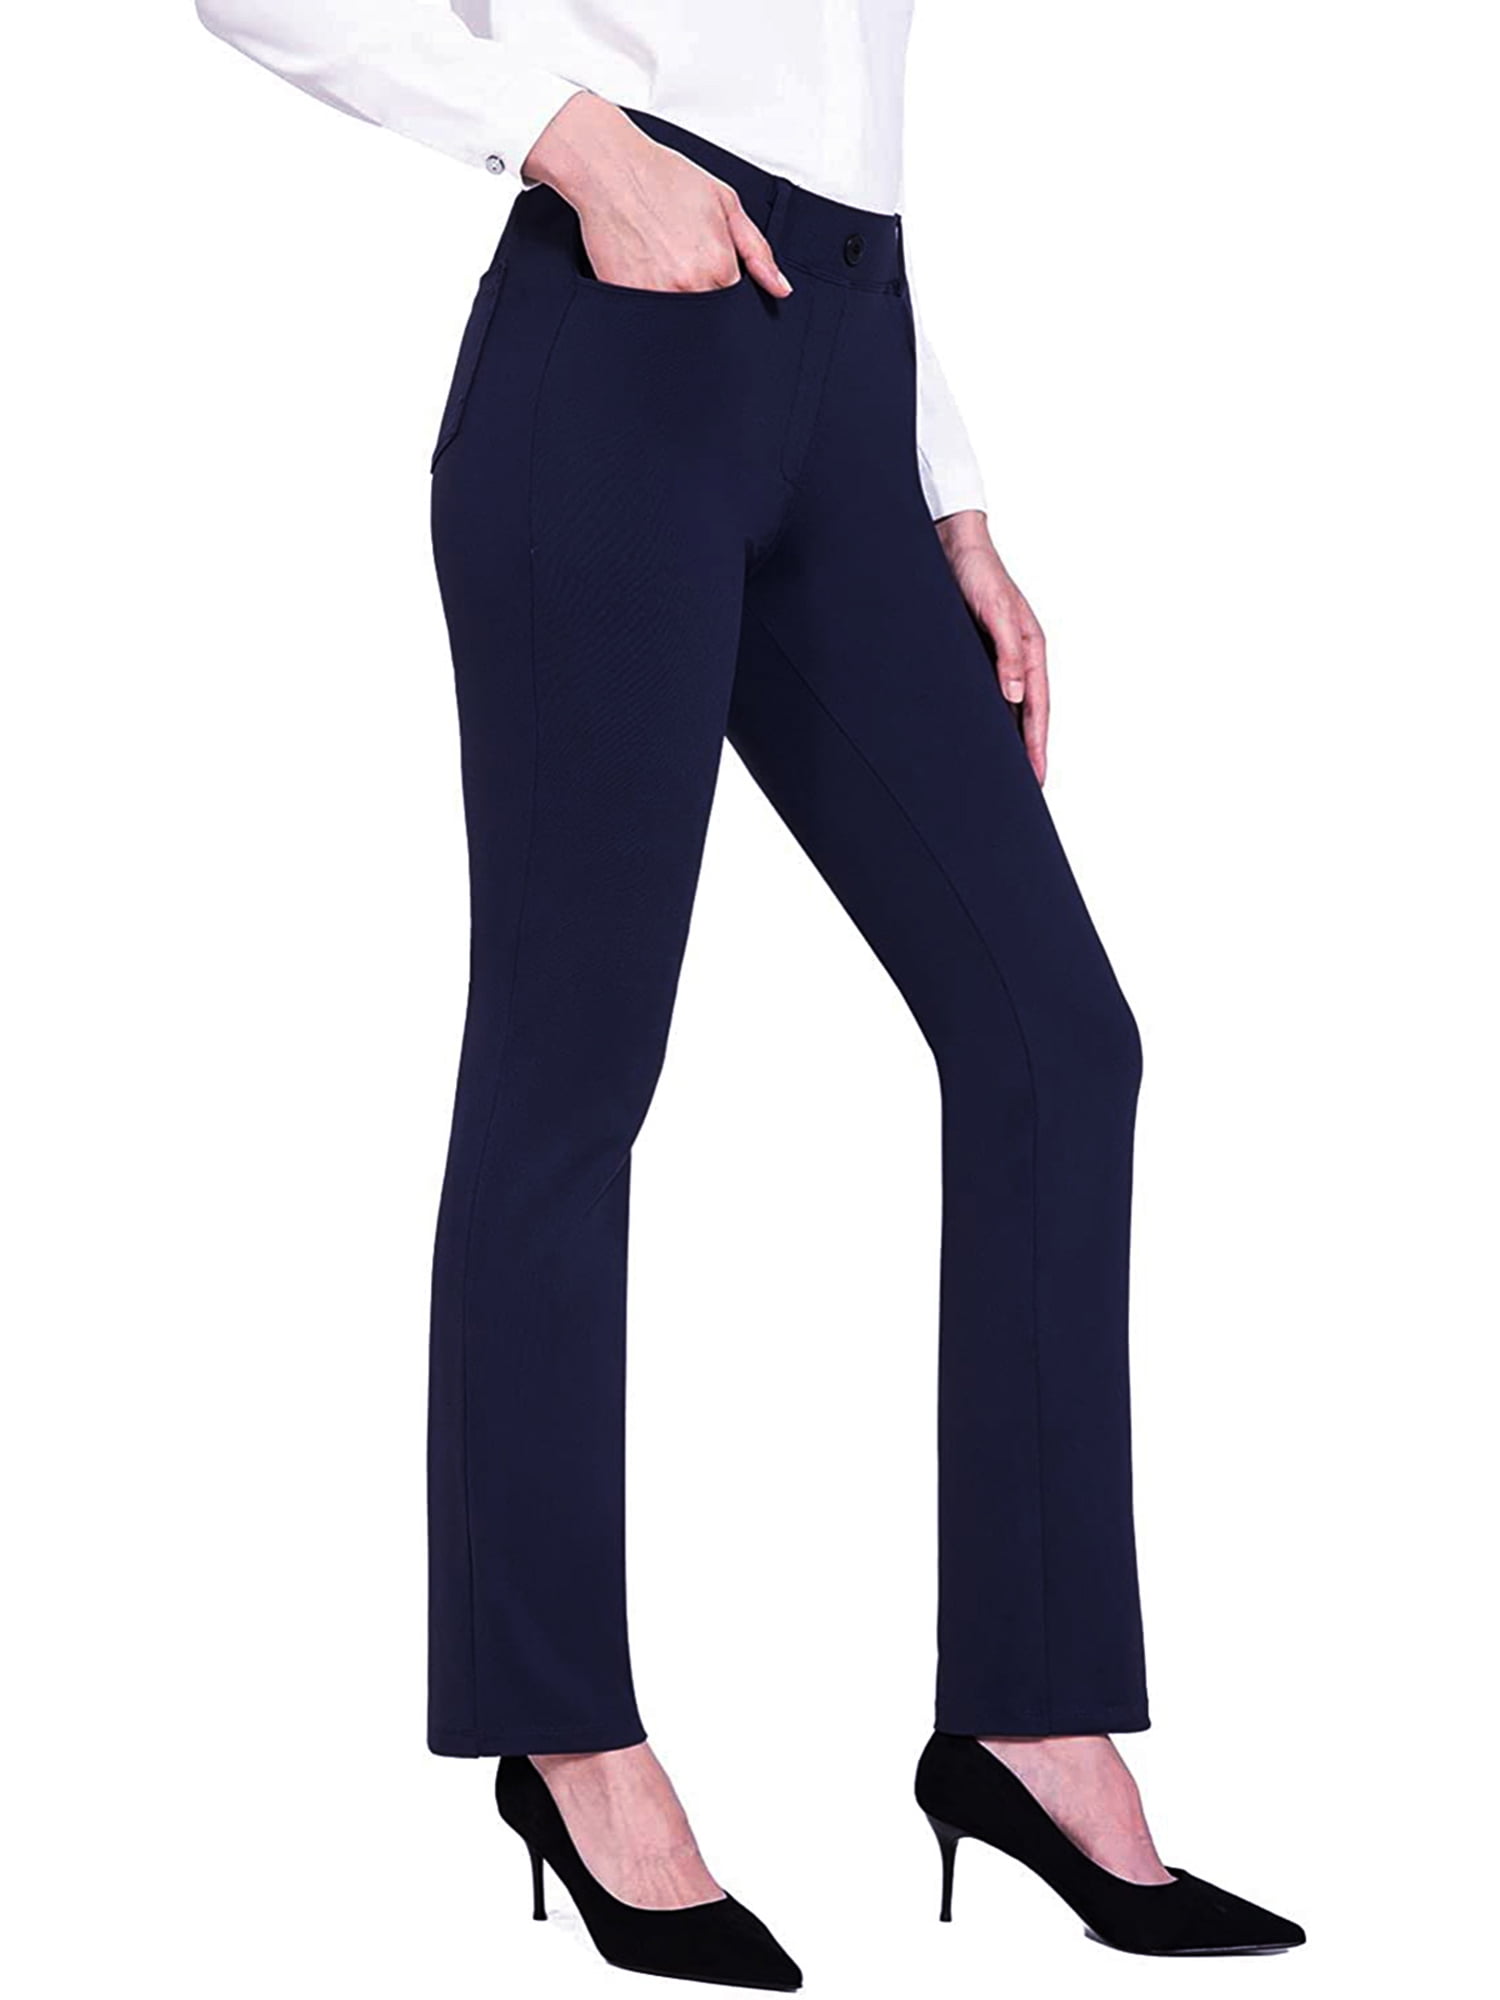 CenturyX Bootcut Yoga Pants for Women Stretchy Work Business Slacks Dress  Pants Casual Straight Leg Trousers with Pockets Navy Blue S